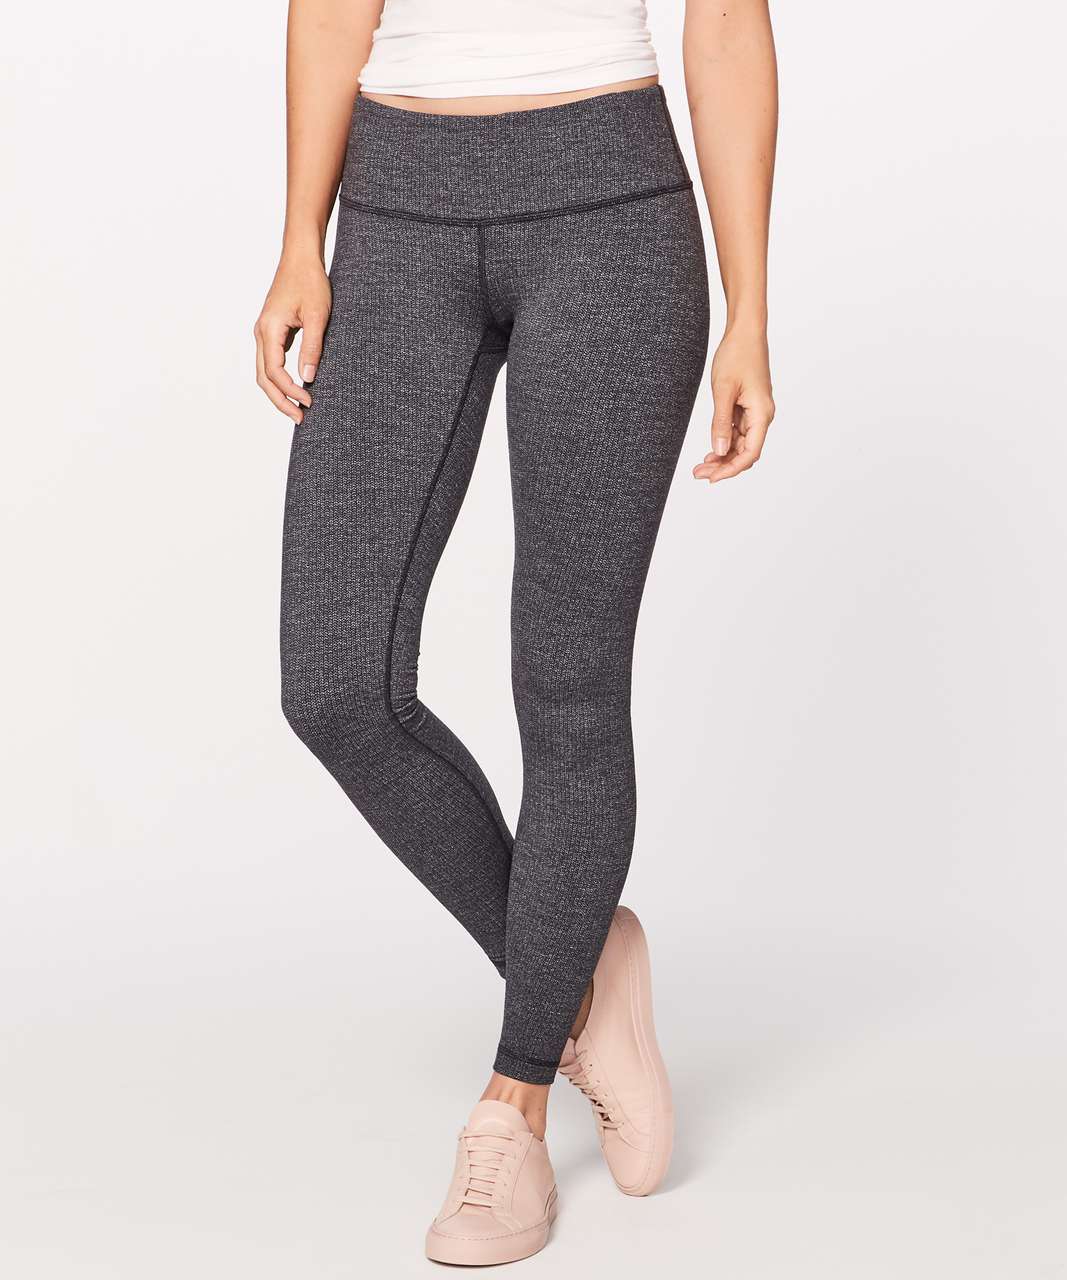 Lululemon Wunder Under Low-Rise Tight *28 - Luon Variegated Knit